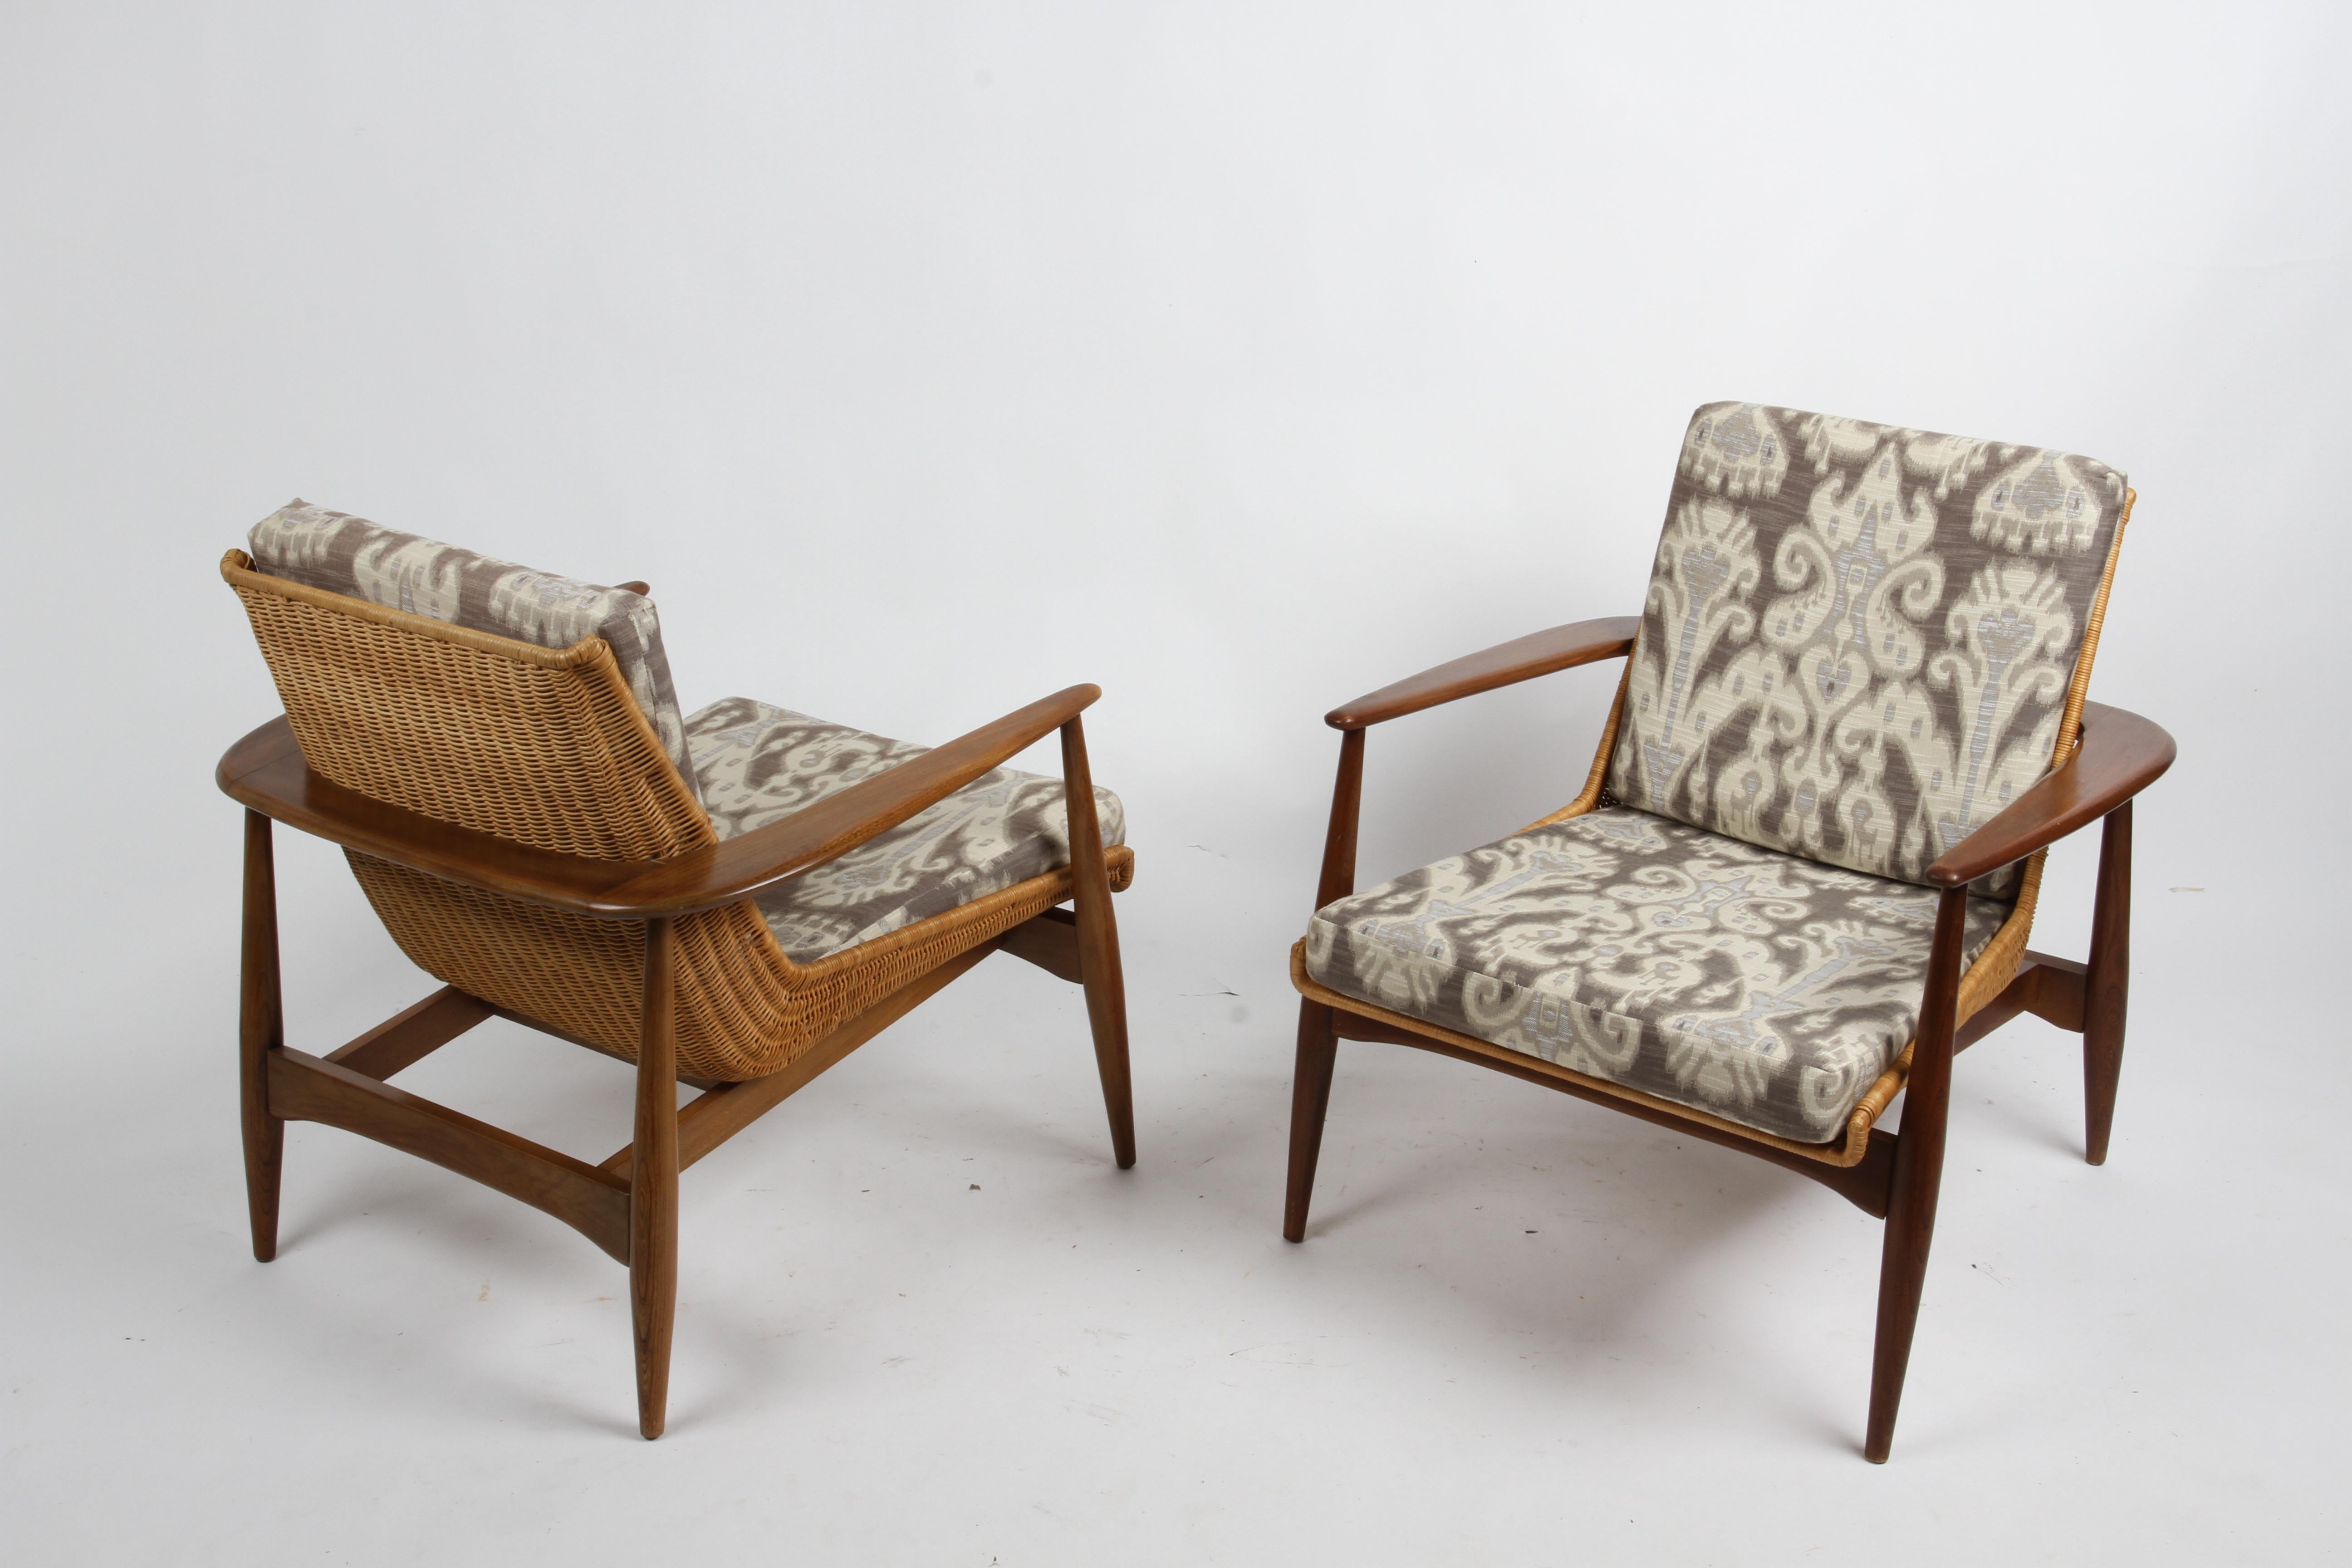 American Rare Pair of Lawrence Peabody's Sculptural 1806 / 917 Chairs in Walnut & Rattan